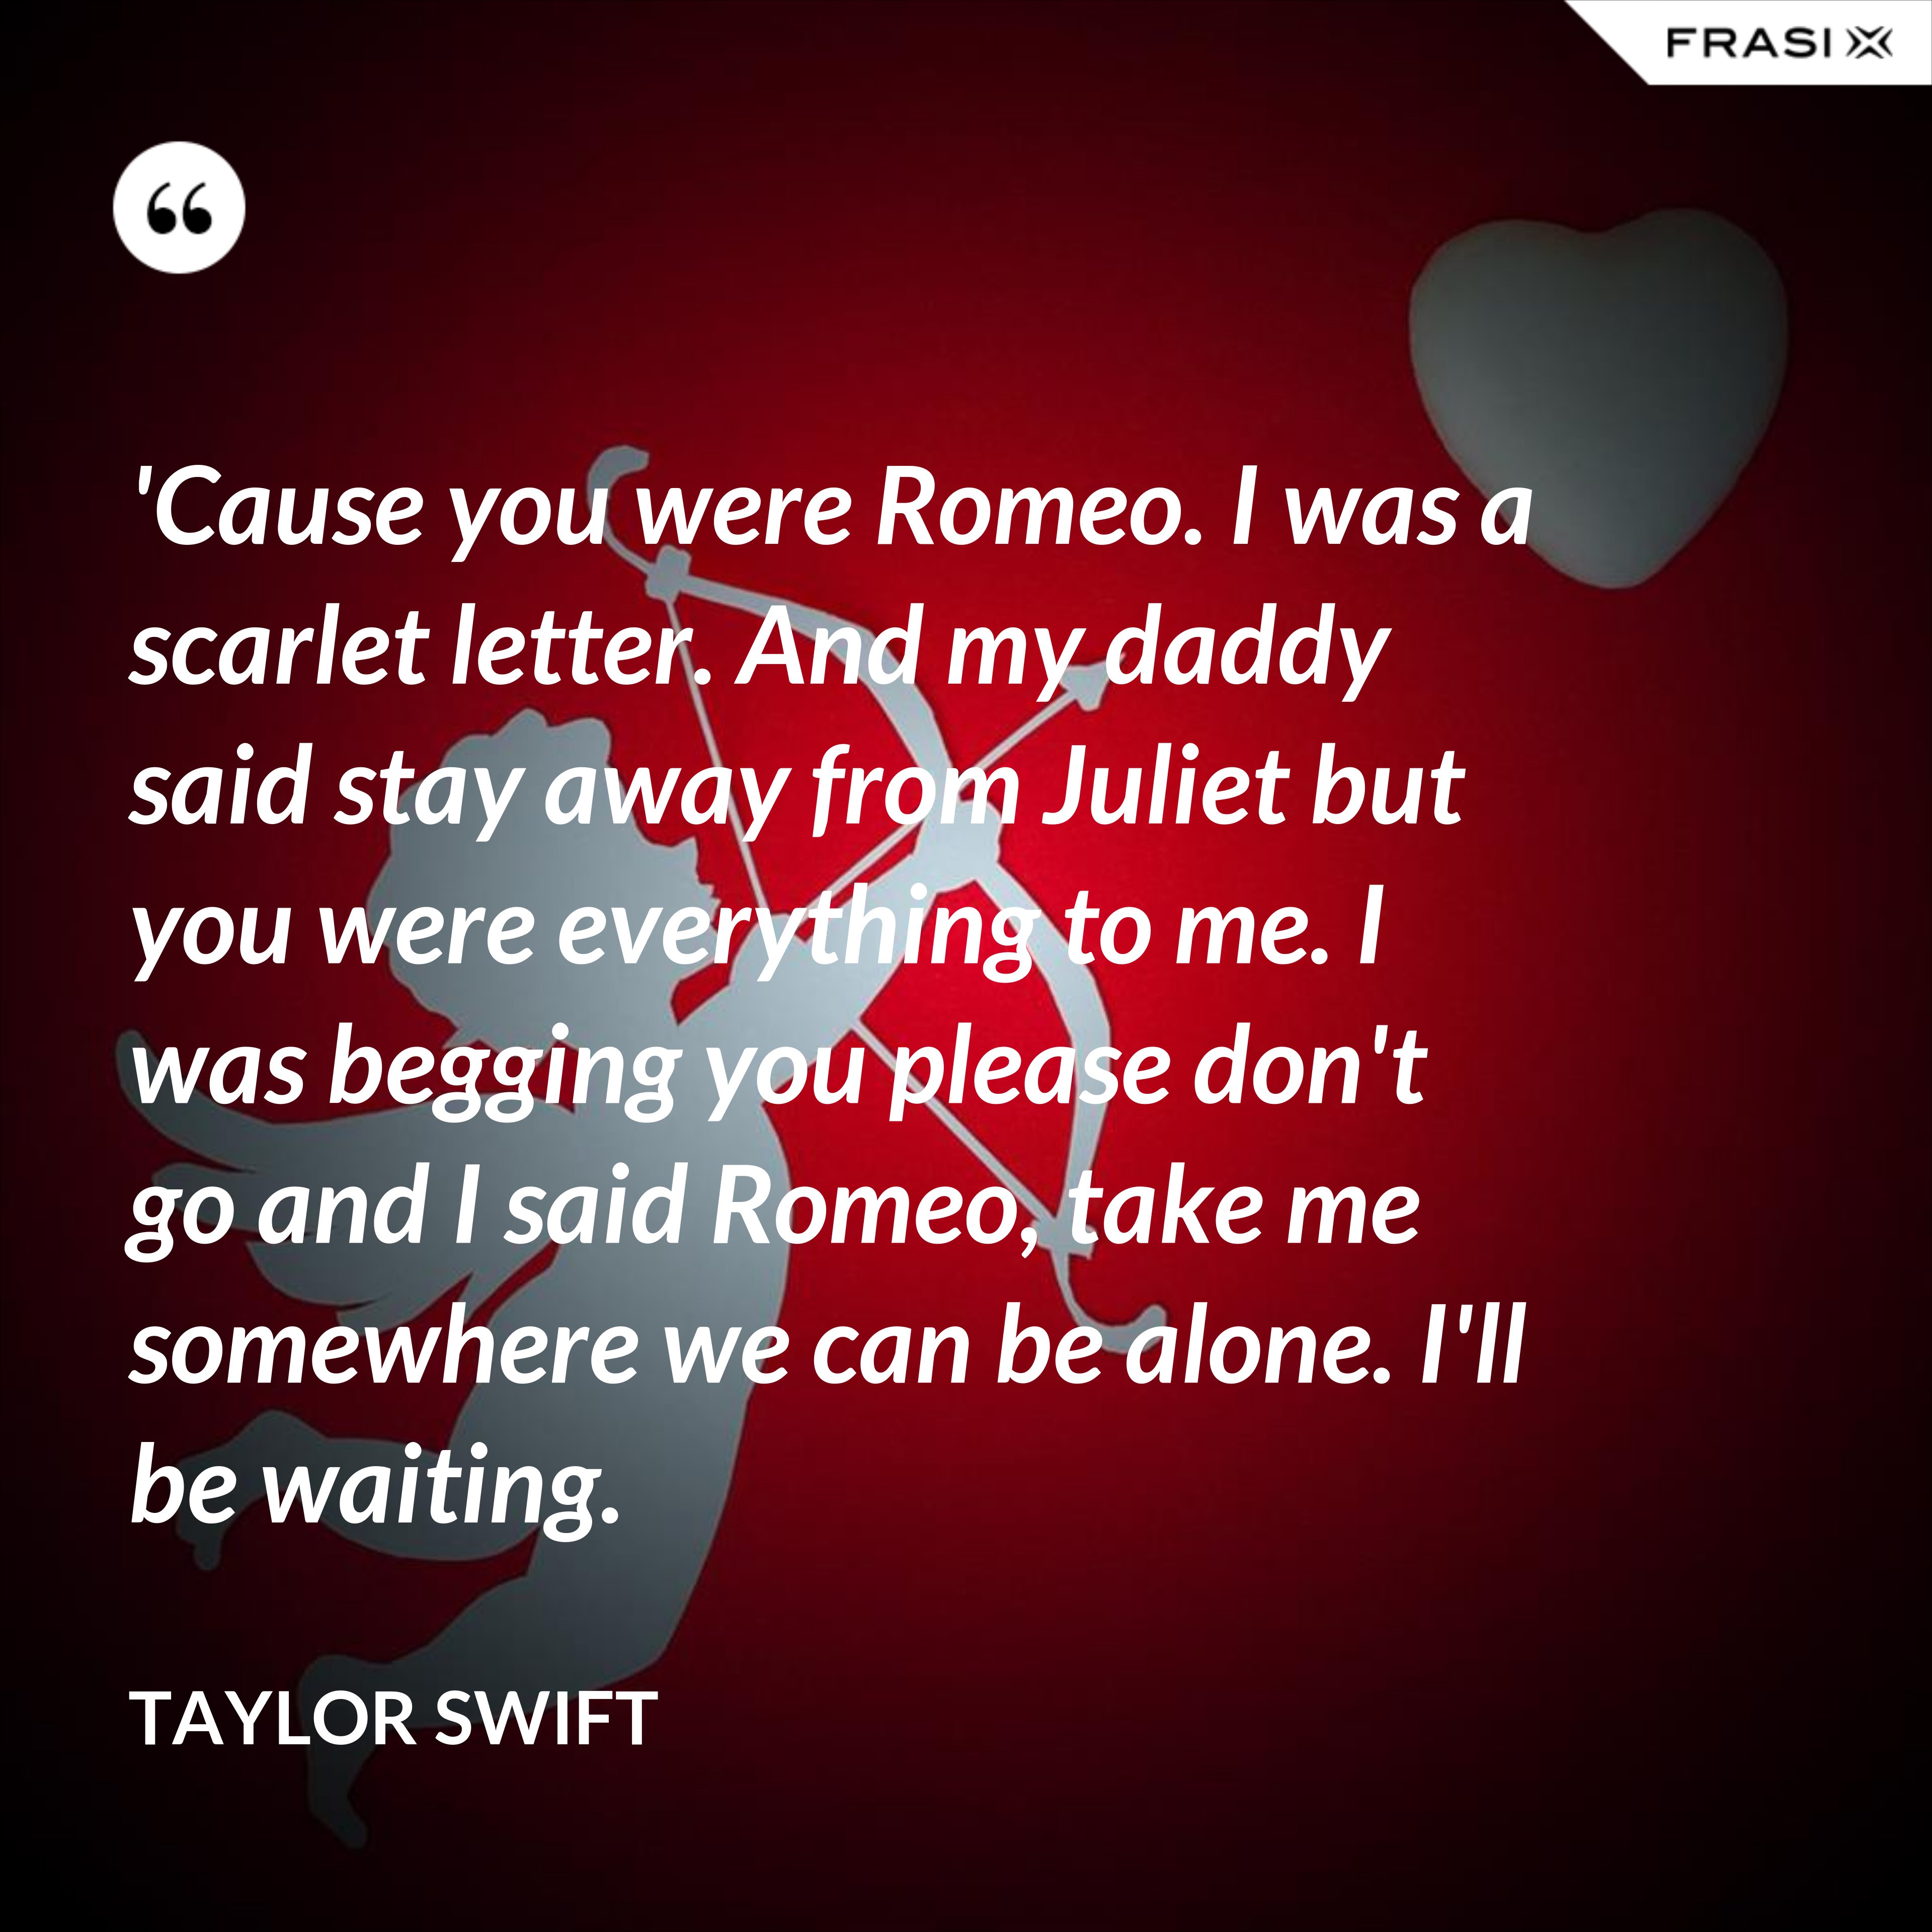 'Cause you were Romeo. I was a scarlet letter. And my daddy said stay away from Juliet but you were everything to me. I was begging you please don't go and I said Romeo, take me somewhere we can be alone. I'll be waiting. - Taylor Swift